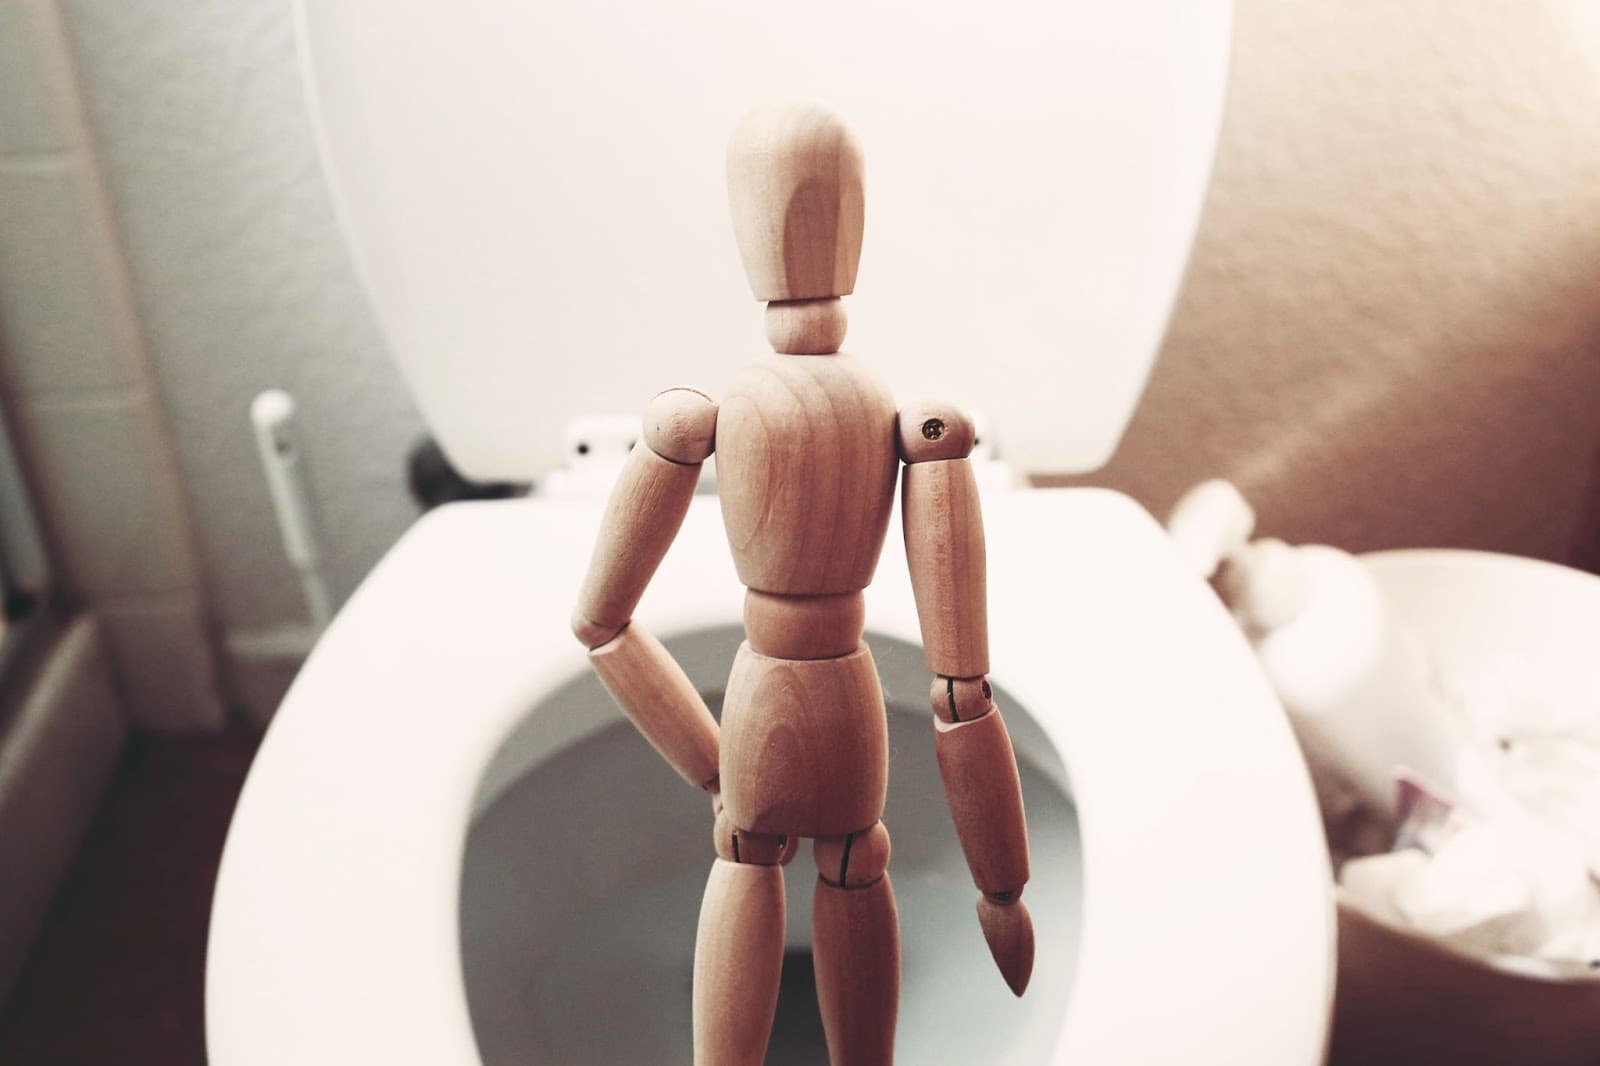 wood toy infront of a toilet